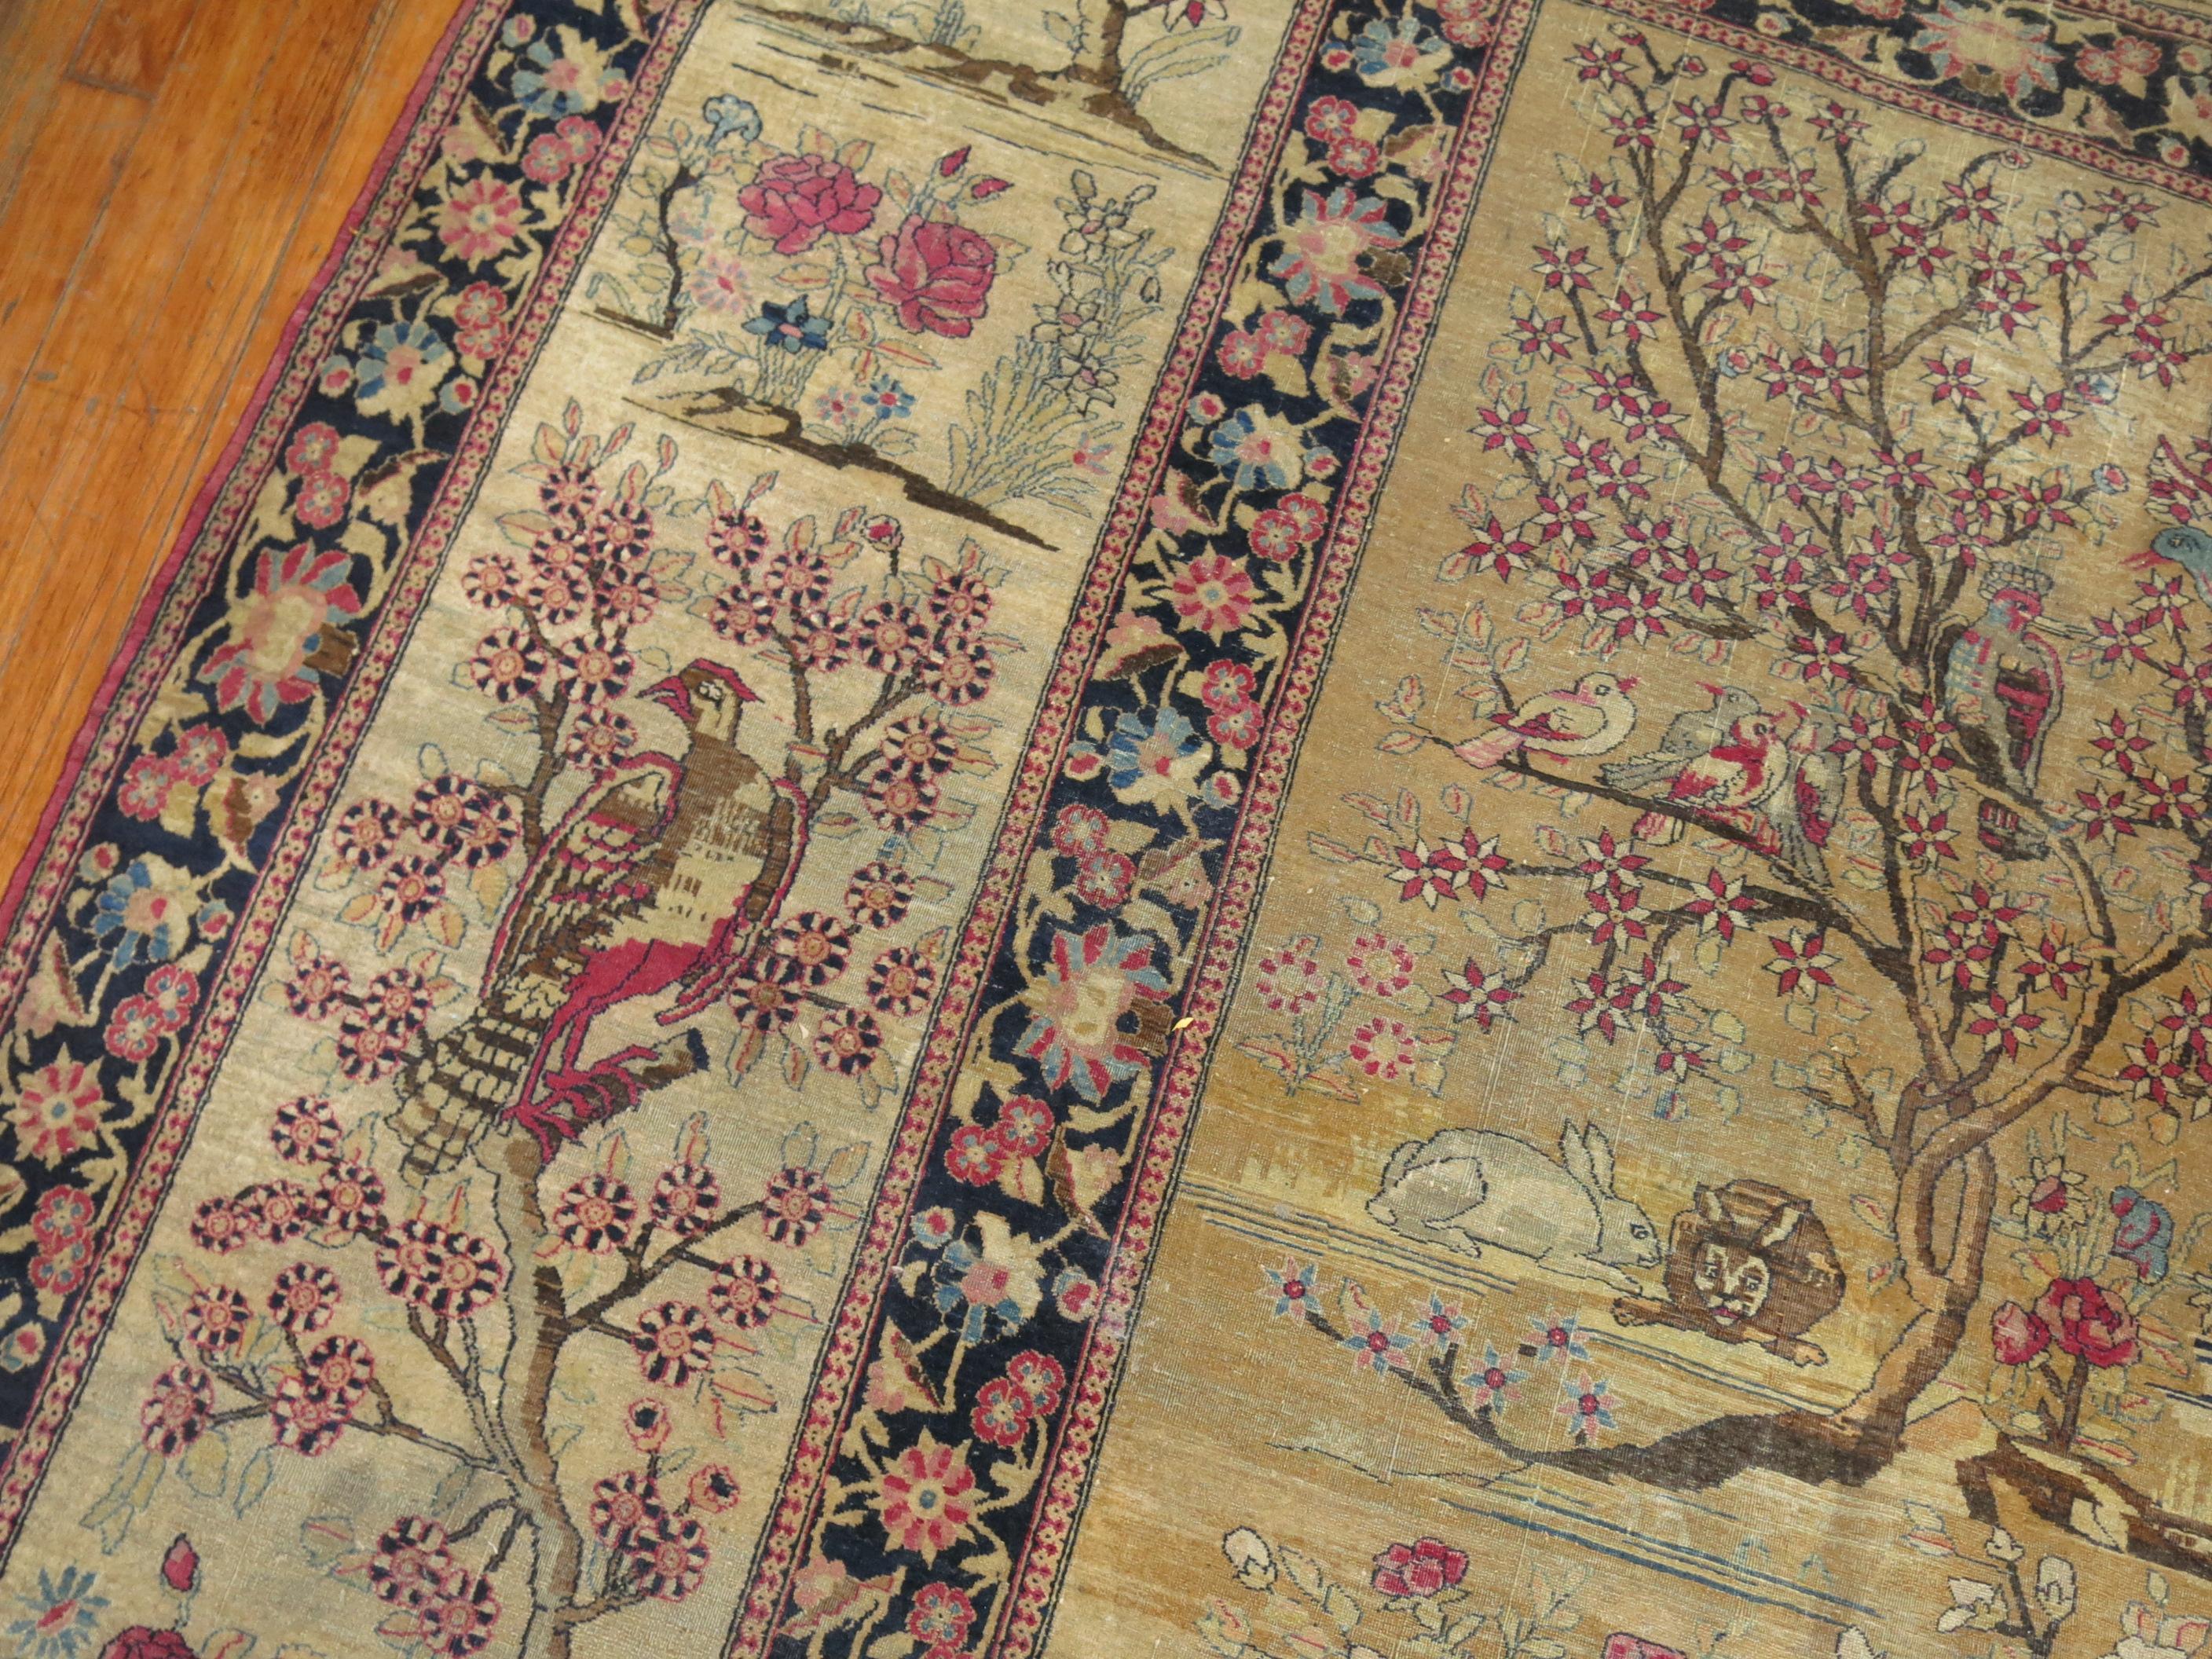 Persian Pictorial Animal Landscape Rug 5